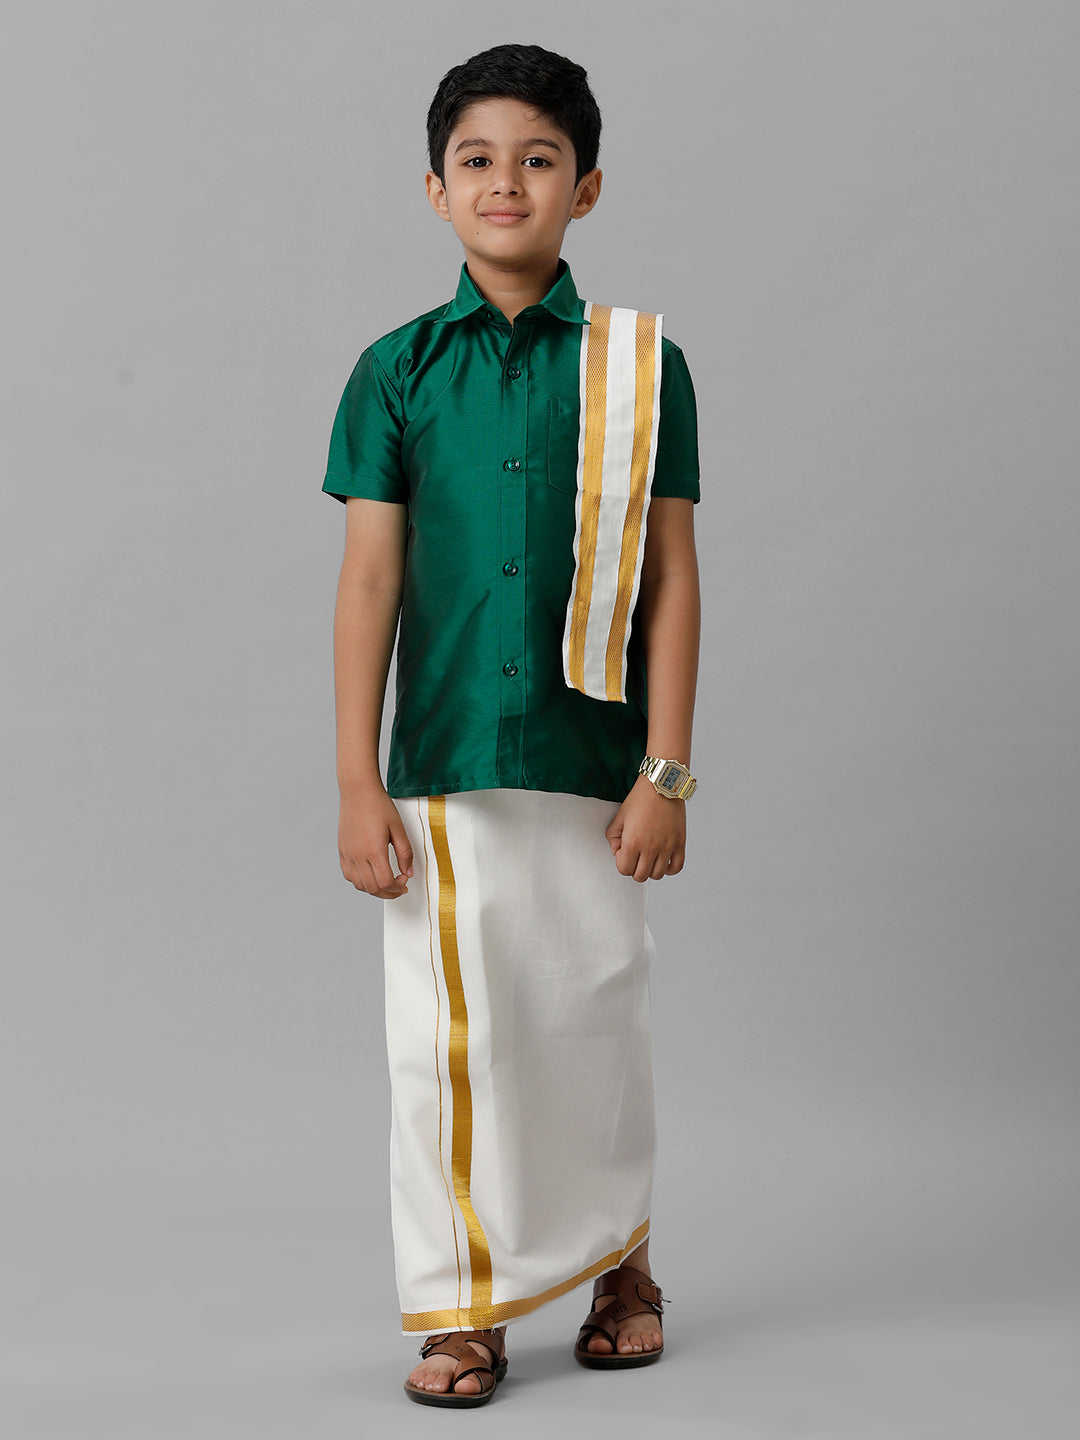 Boys Silk Cotton Green Half Sleeves Shirt with Adjustable Cream Dhoti Towel Combo K9-Front view